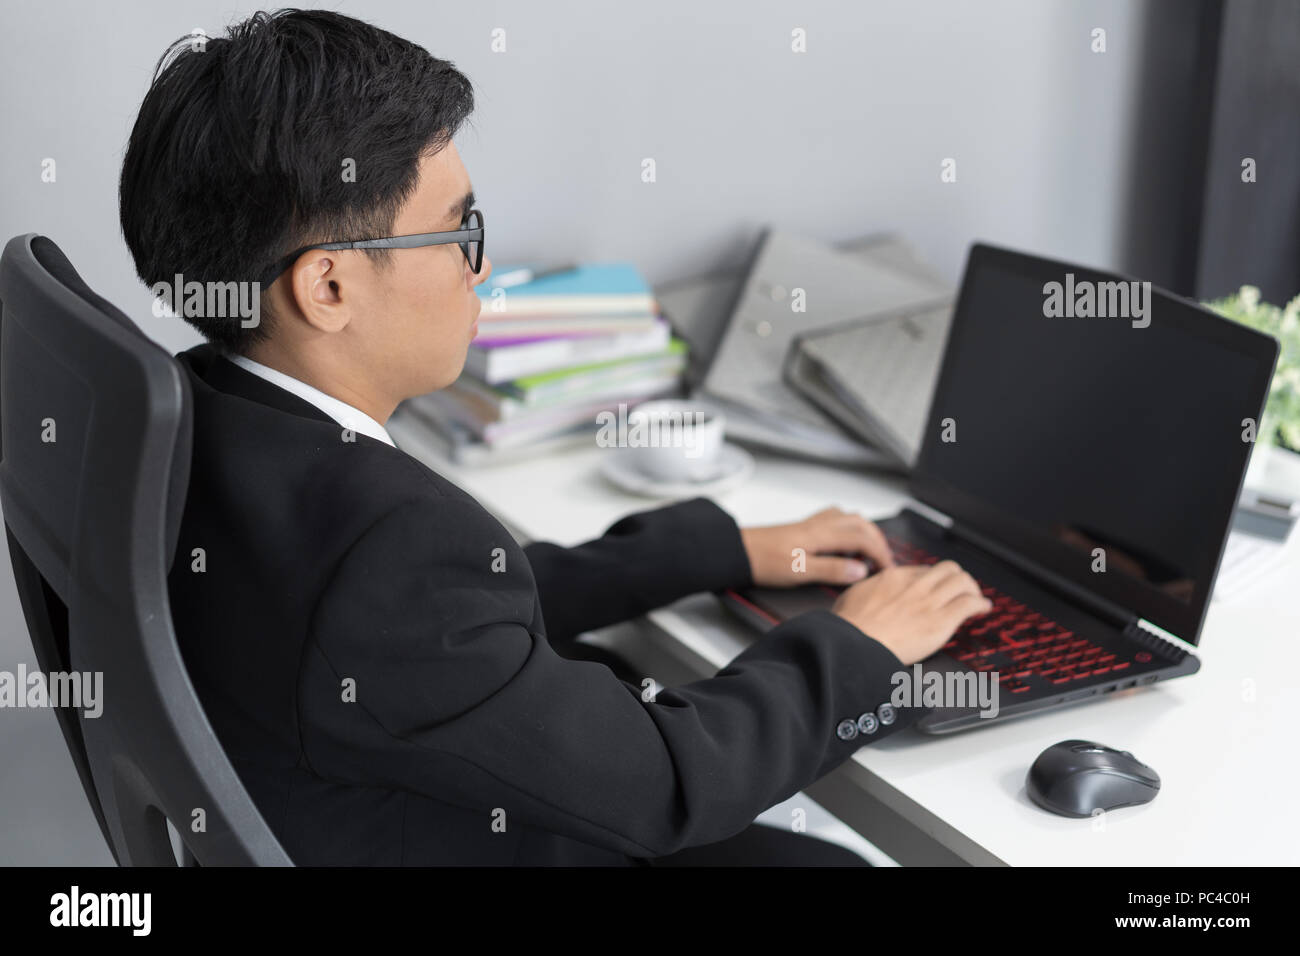 young business man using laptop computer Stock Photo